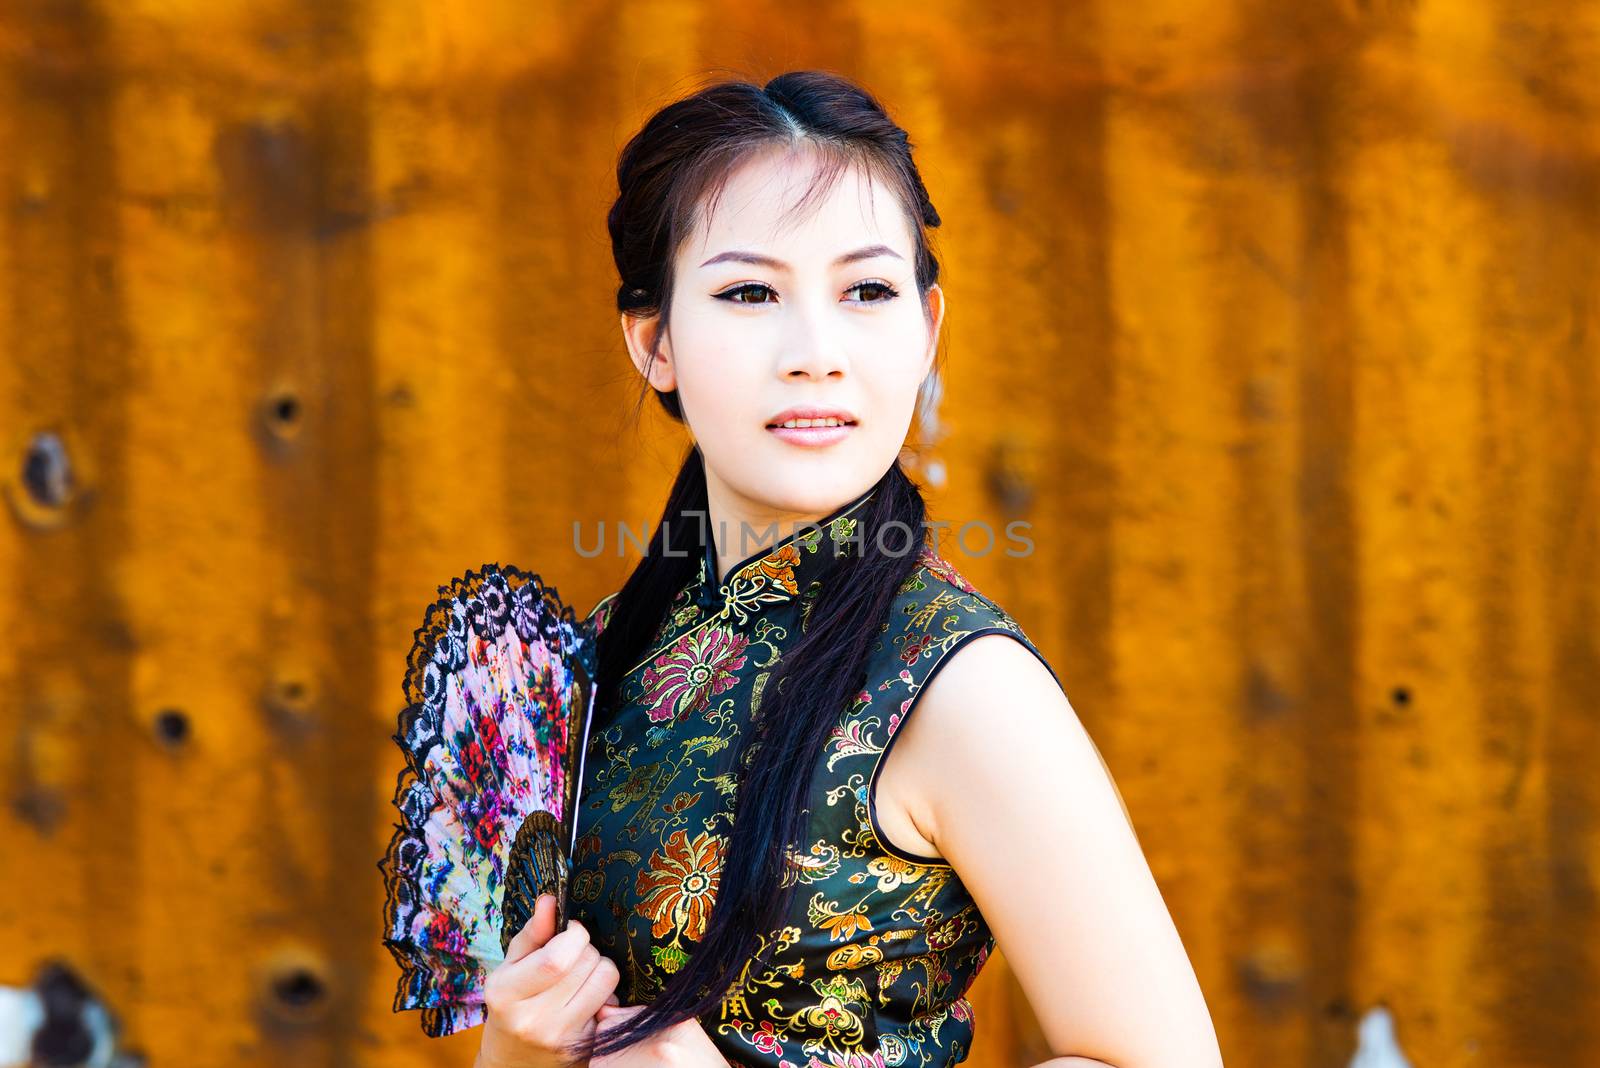 Chinese girl in traditional Chinese cheongsam blessing